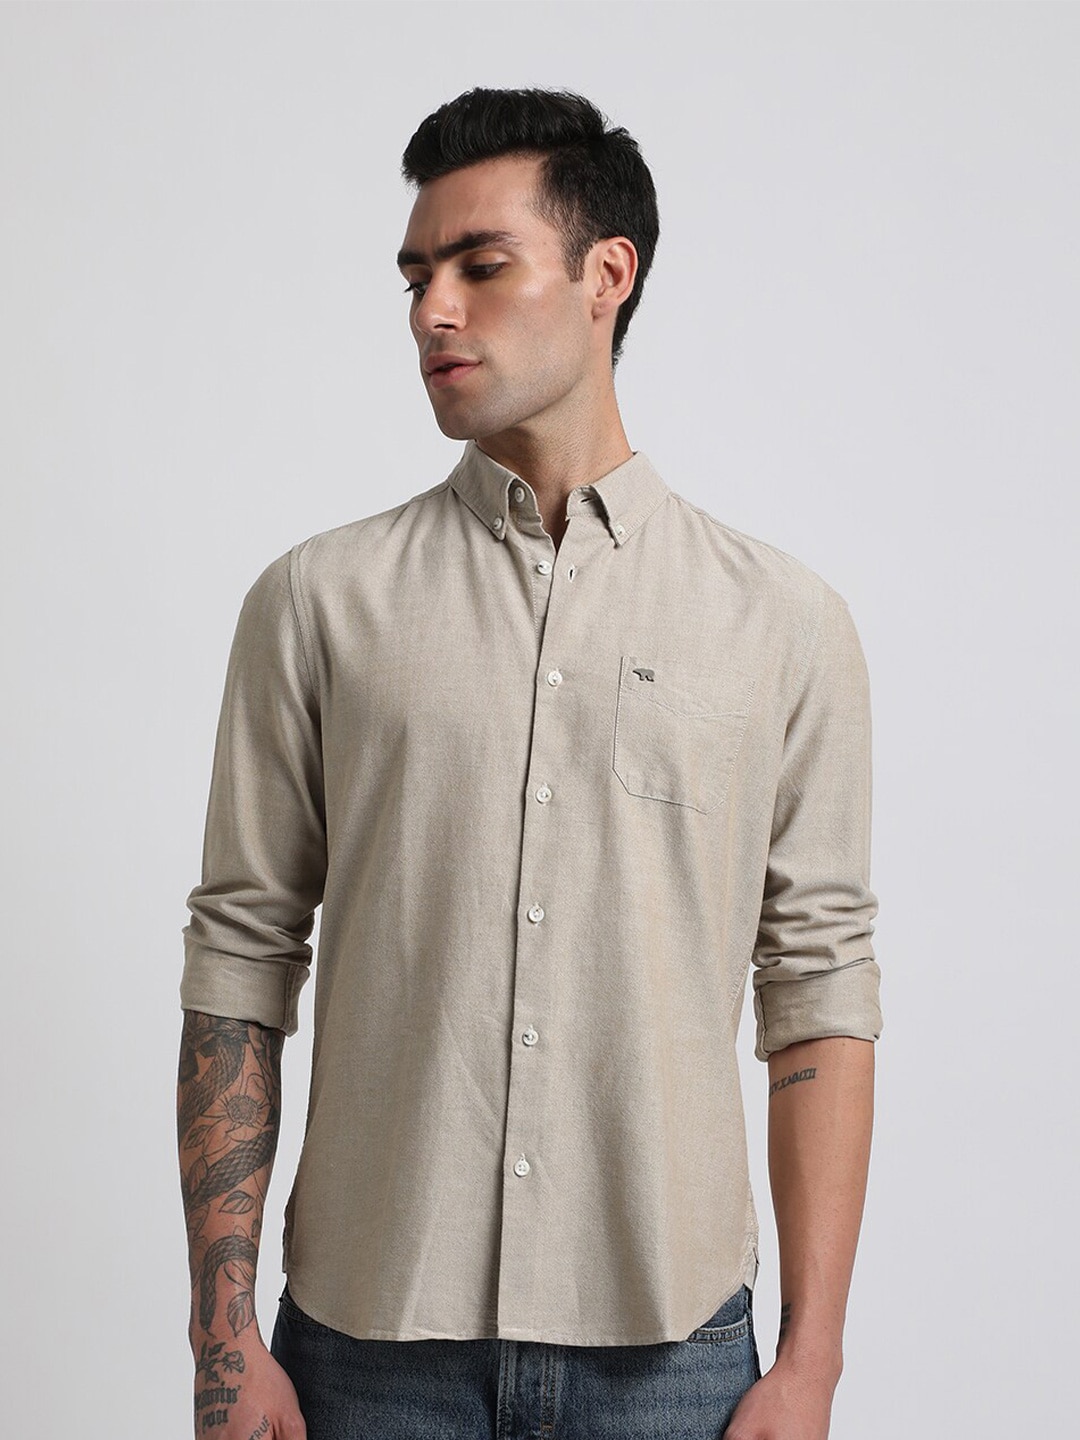 THE BEAR HOUSE Slim Fit Opaque Oxford Pure Cotton Casual Shirt